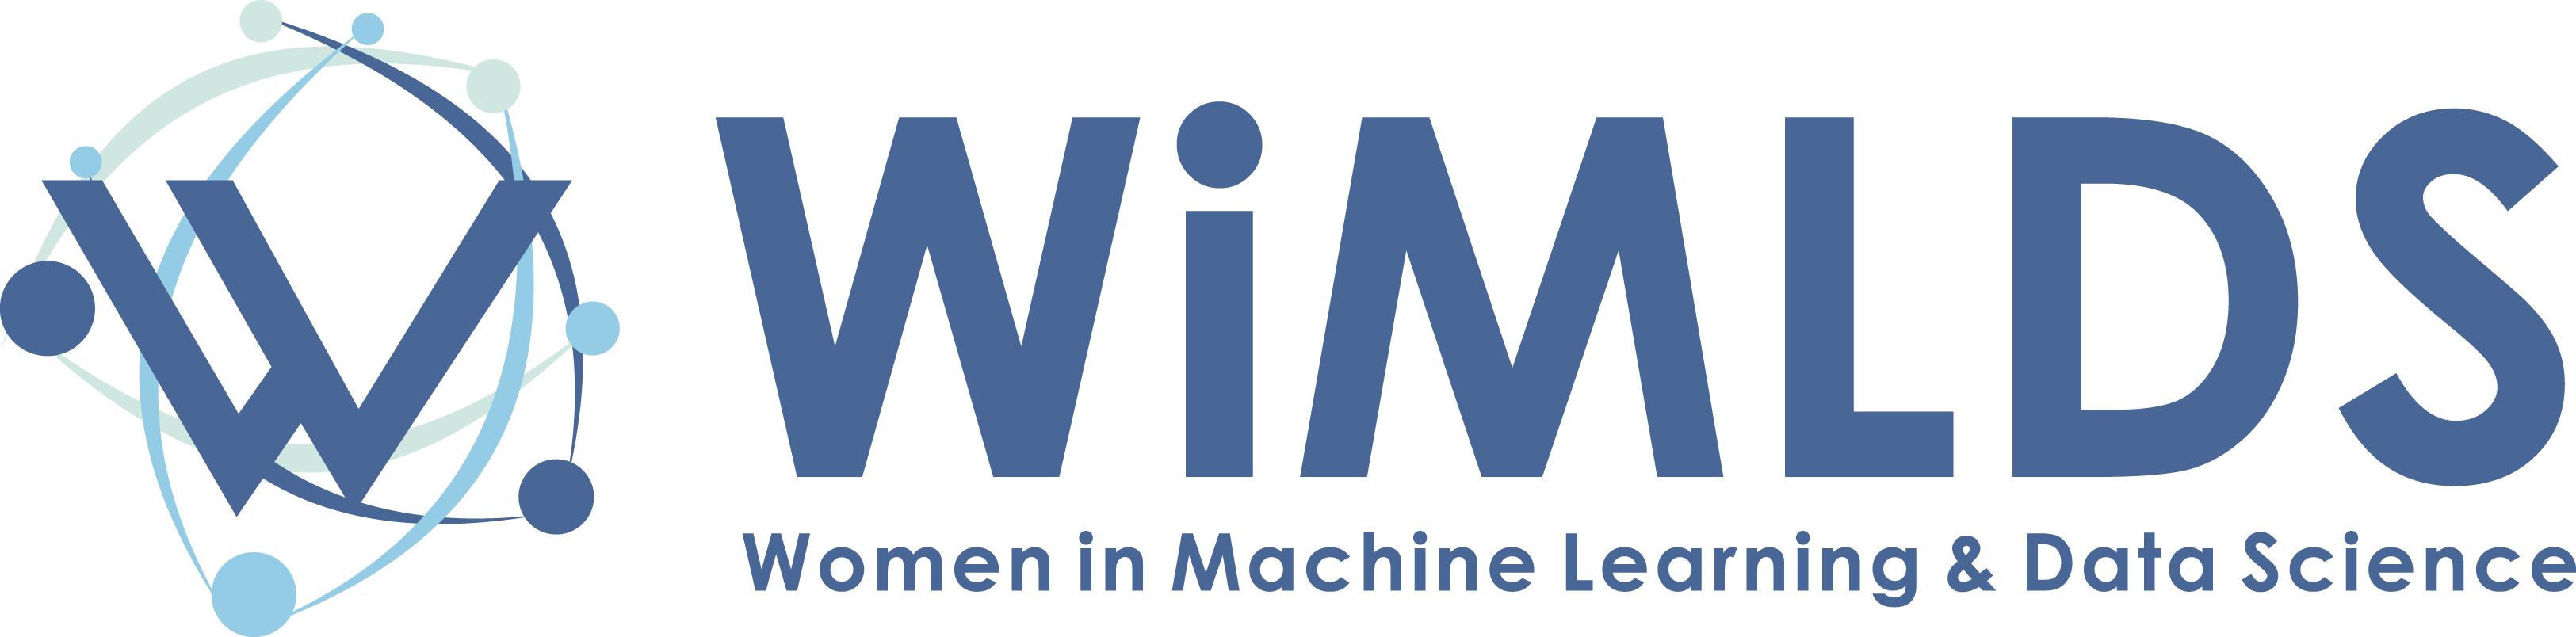 Women in machine learning and data science logo